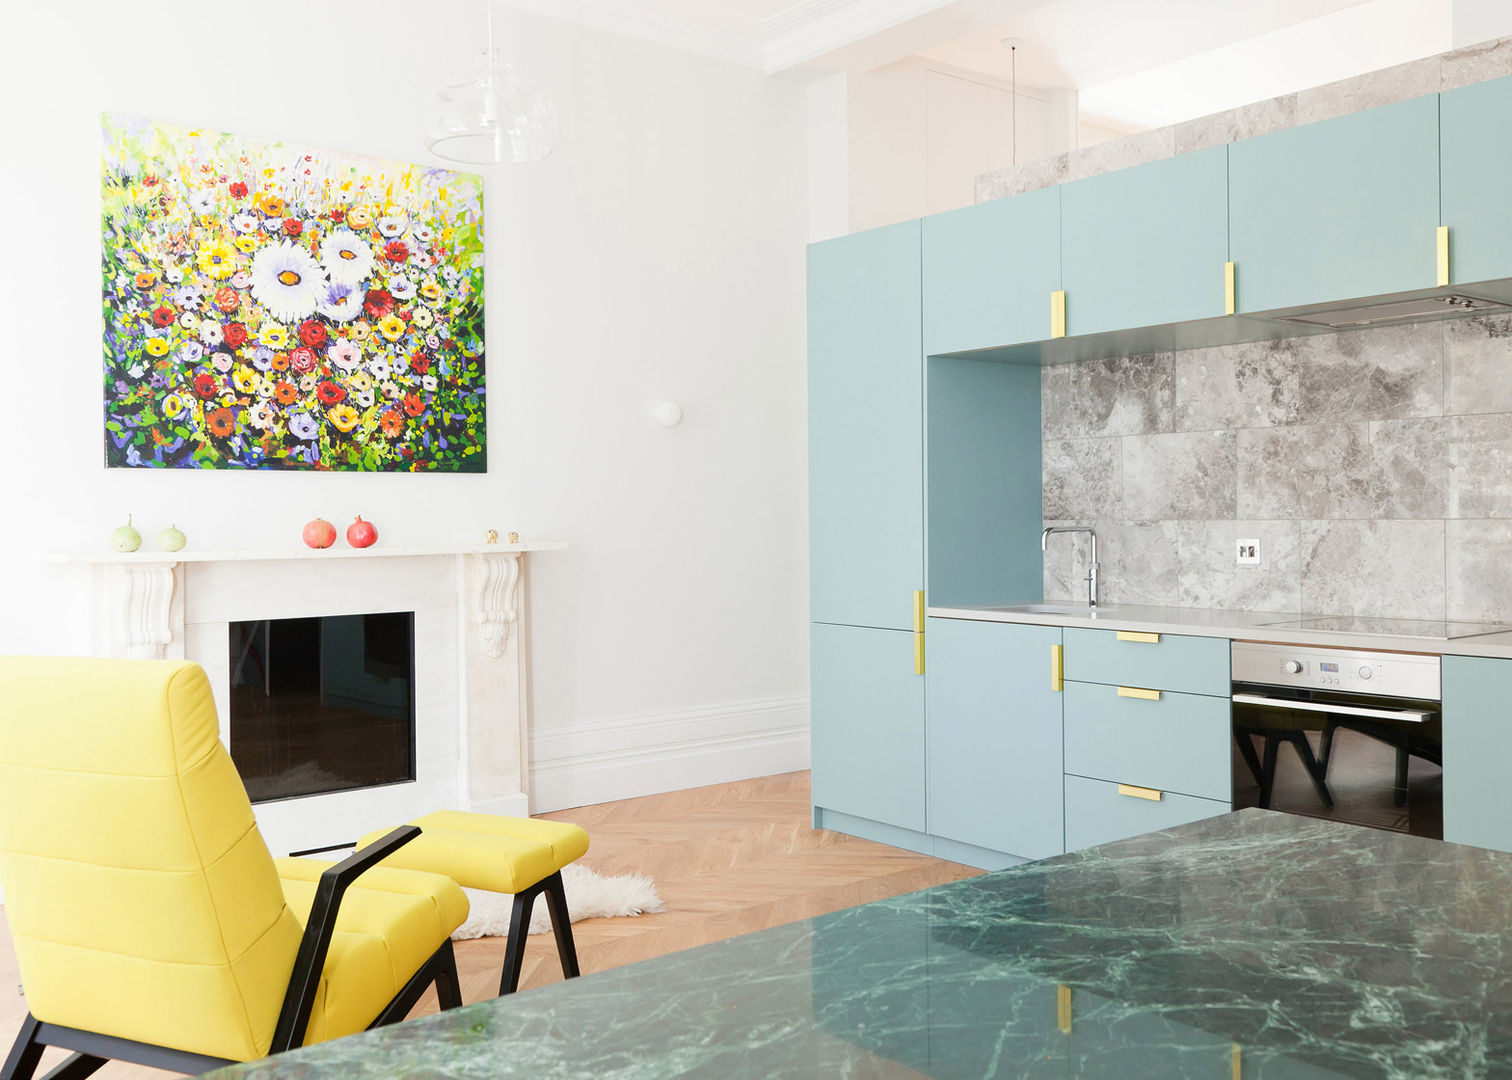 Westbourne Gardens NAKED Kitchens Modern kitchen yellow chair,blue cabinets,gold handles,miele,oven,floral artwork,fireplace,modern,open plan,contemporary,mottled grey tiles